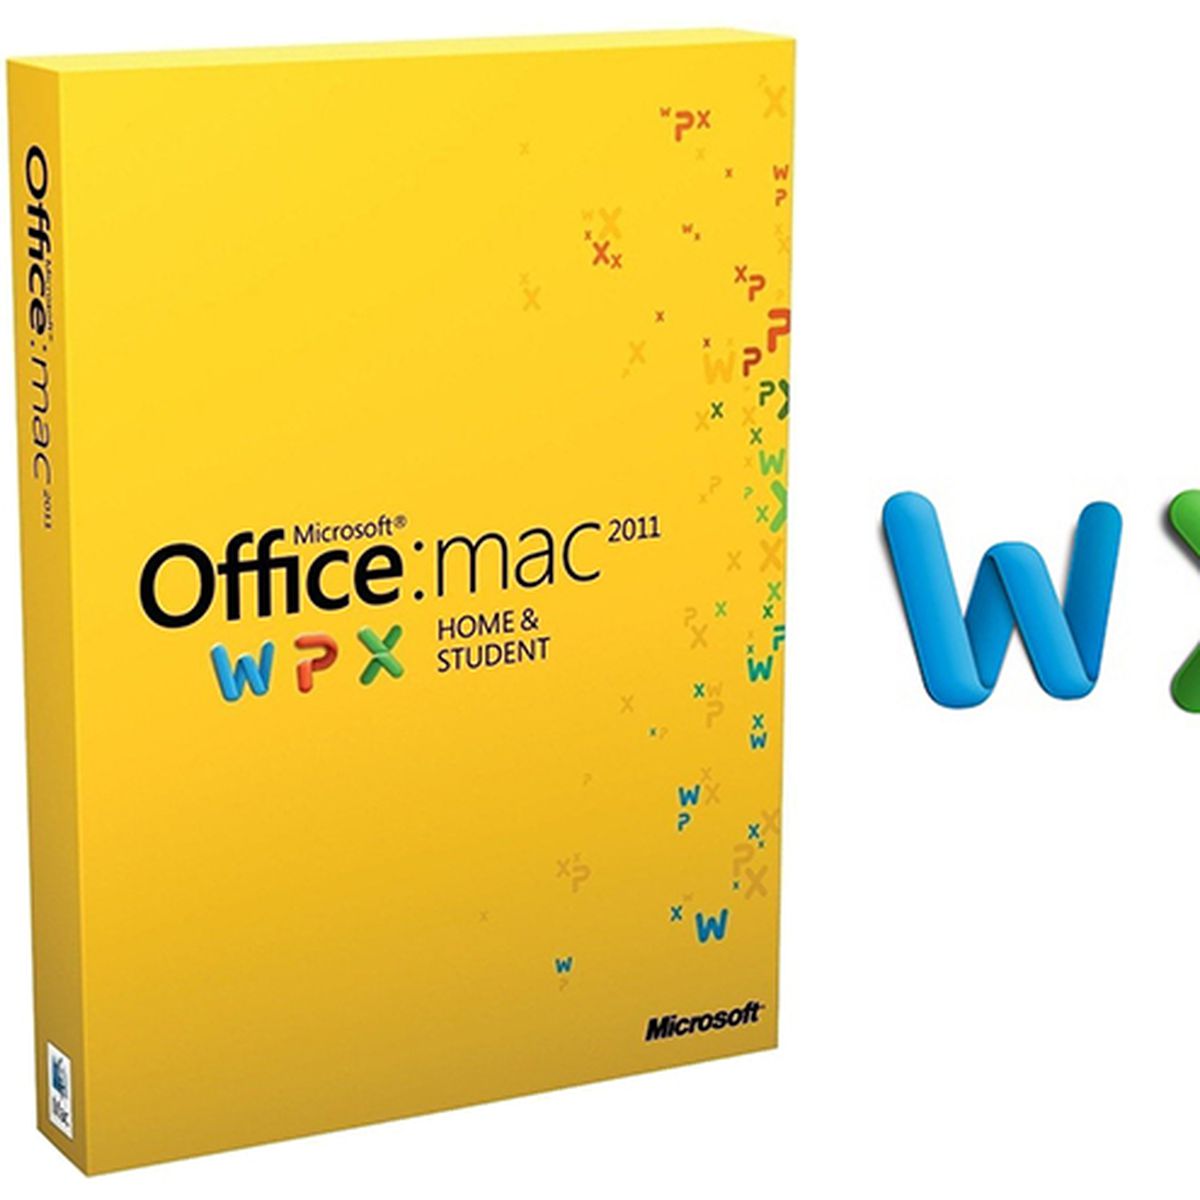 Office 2011 Home Student Mac Download